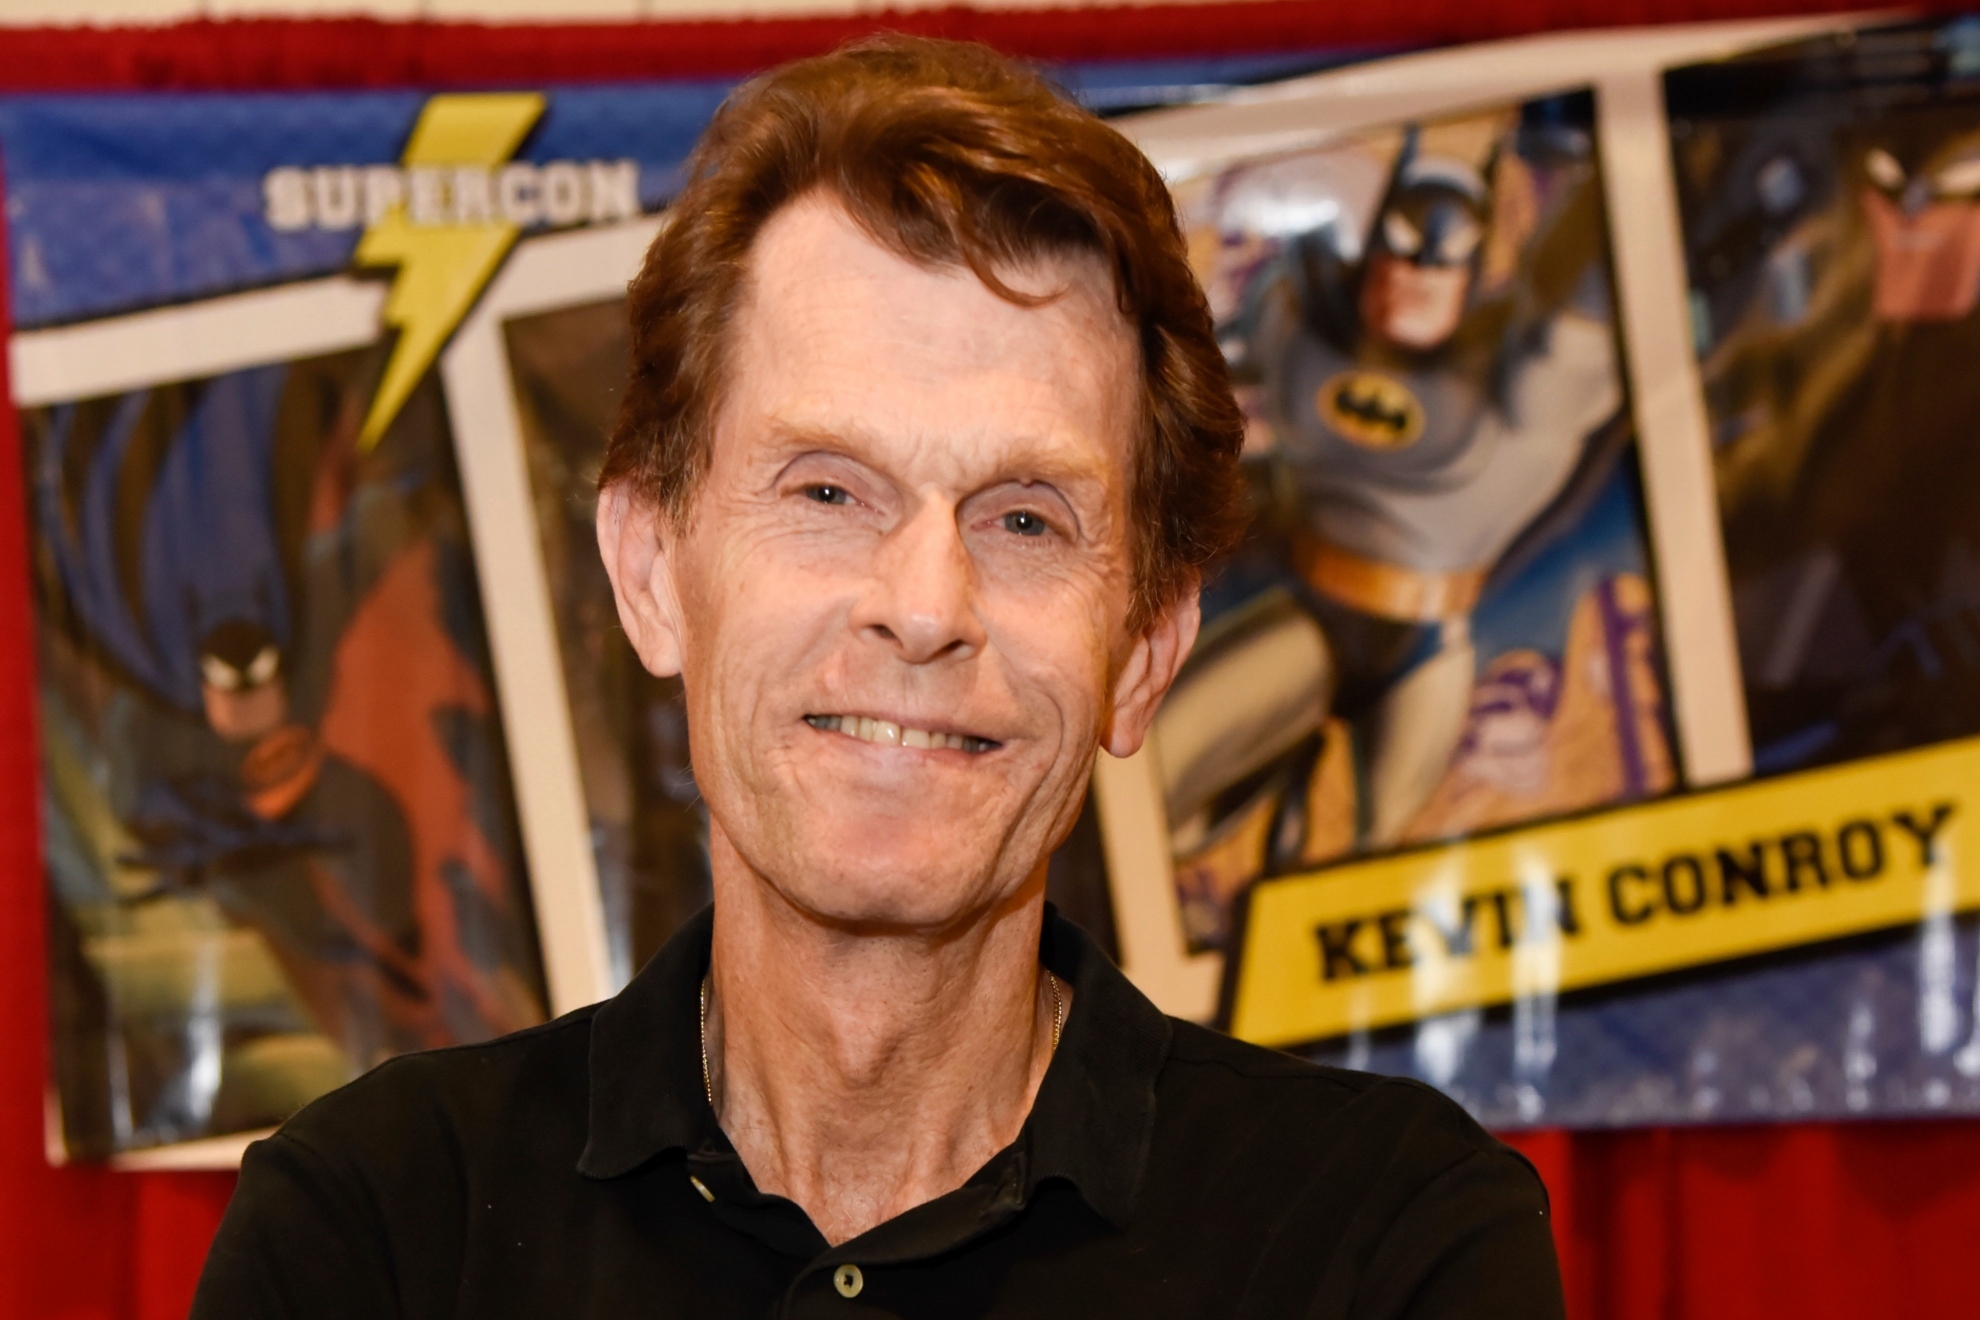 Kevin Conroy was ranked as the best Batman weeks before his passing according to comic-book pundits